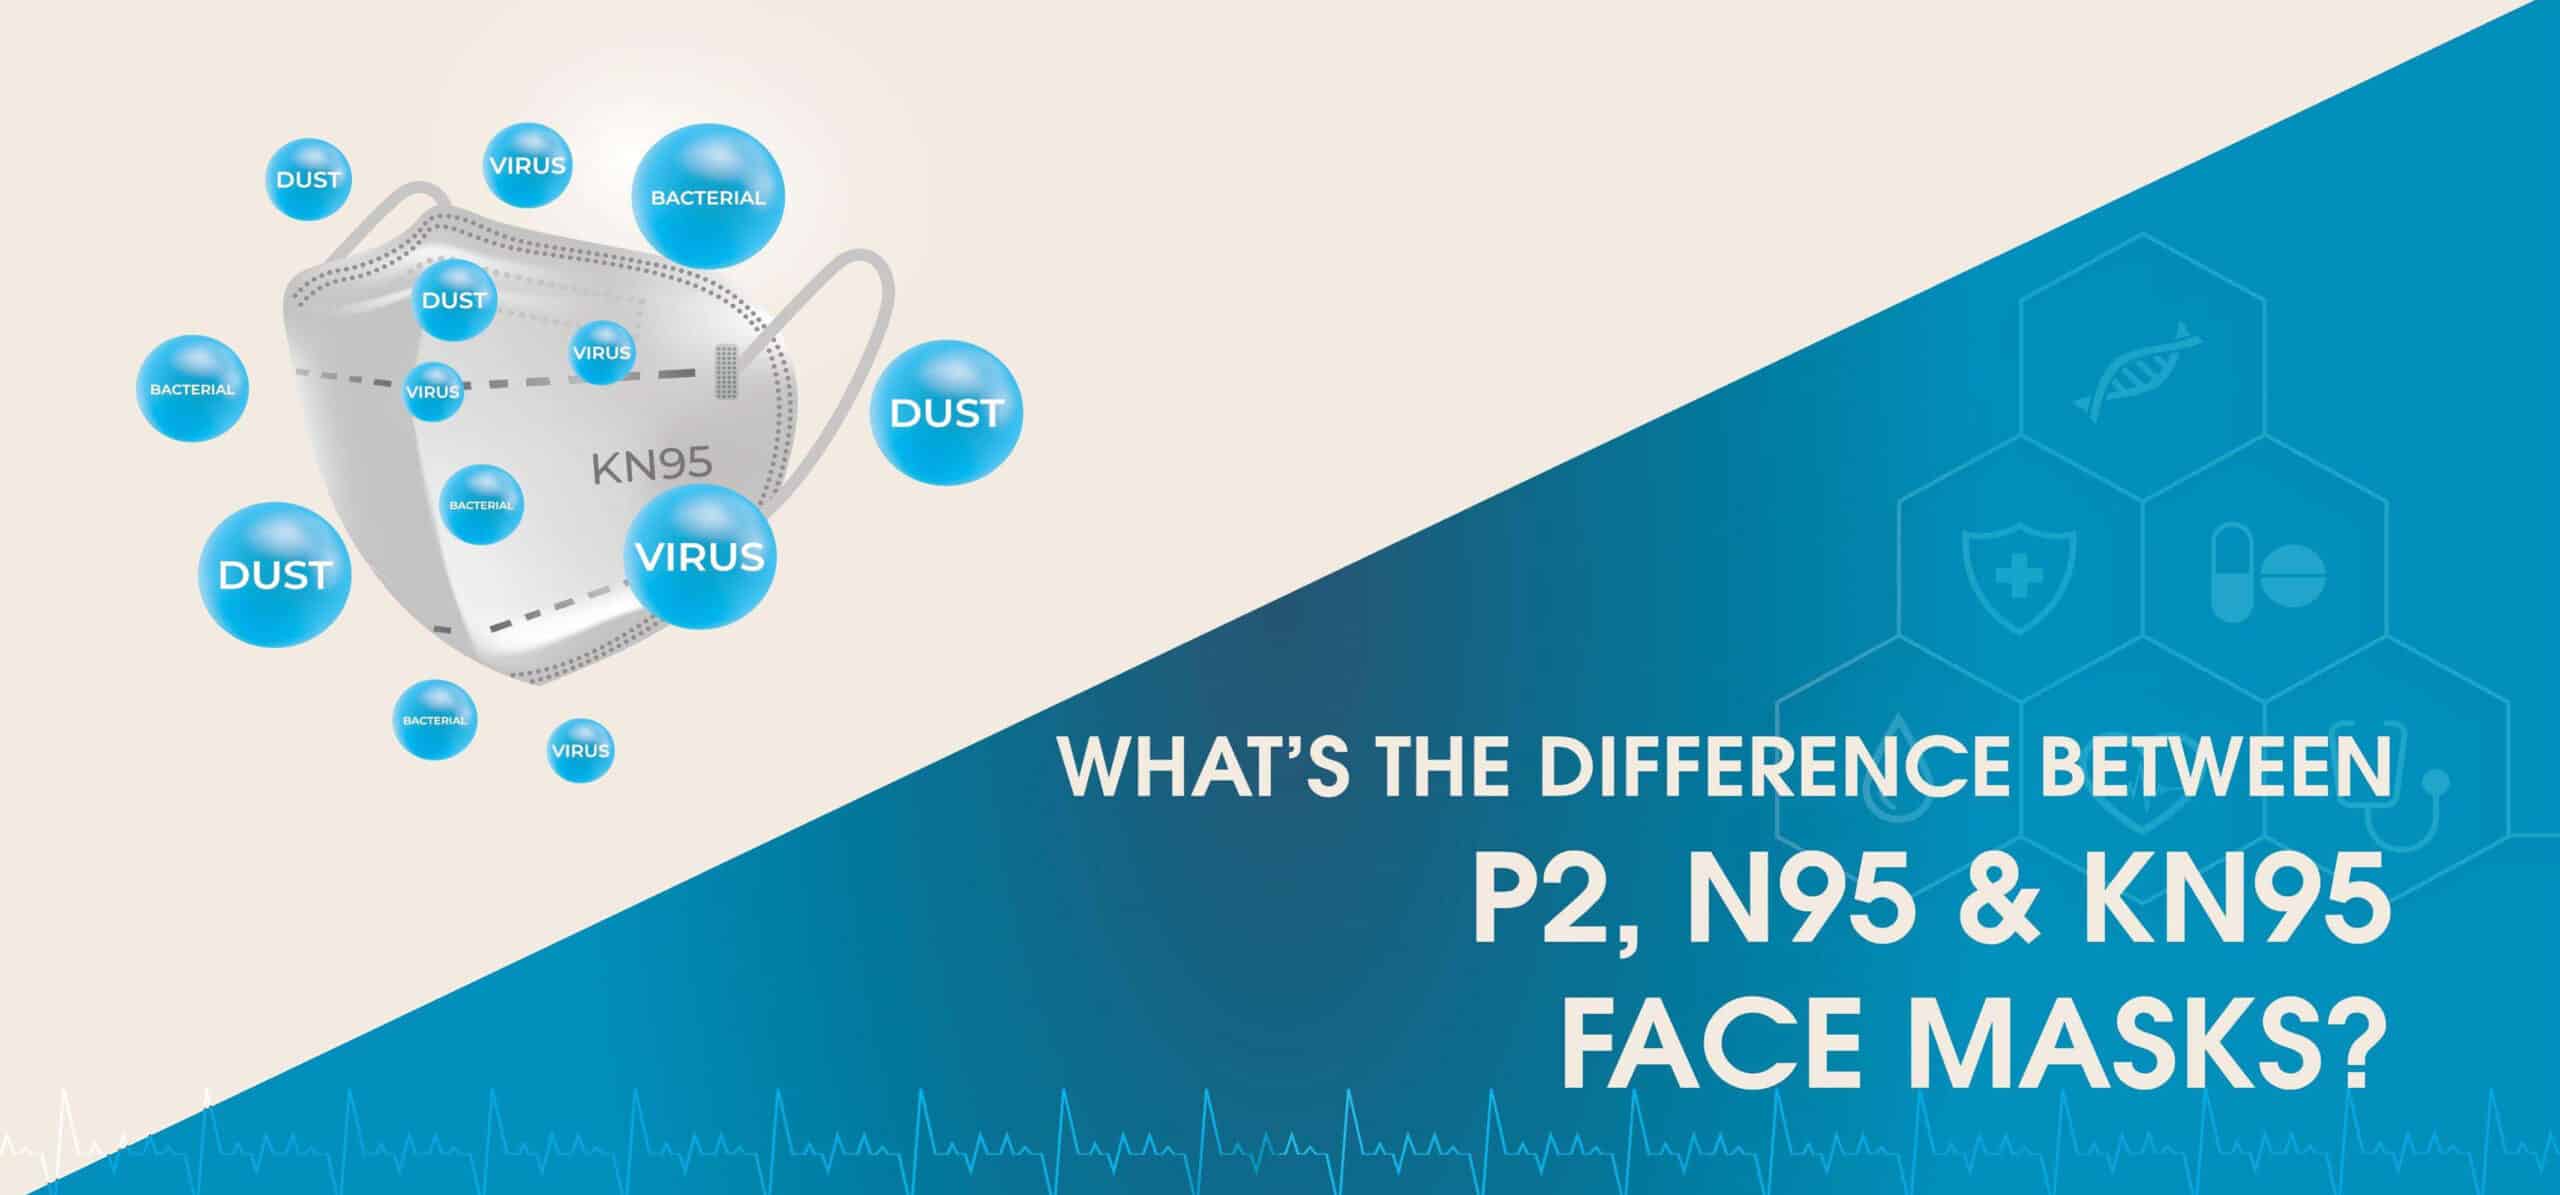 What makes a P2, N95, and KN95 mask different from one another?